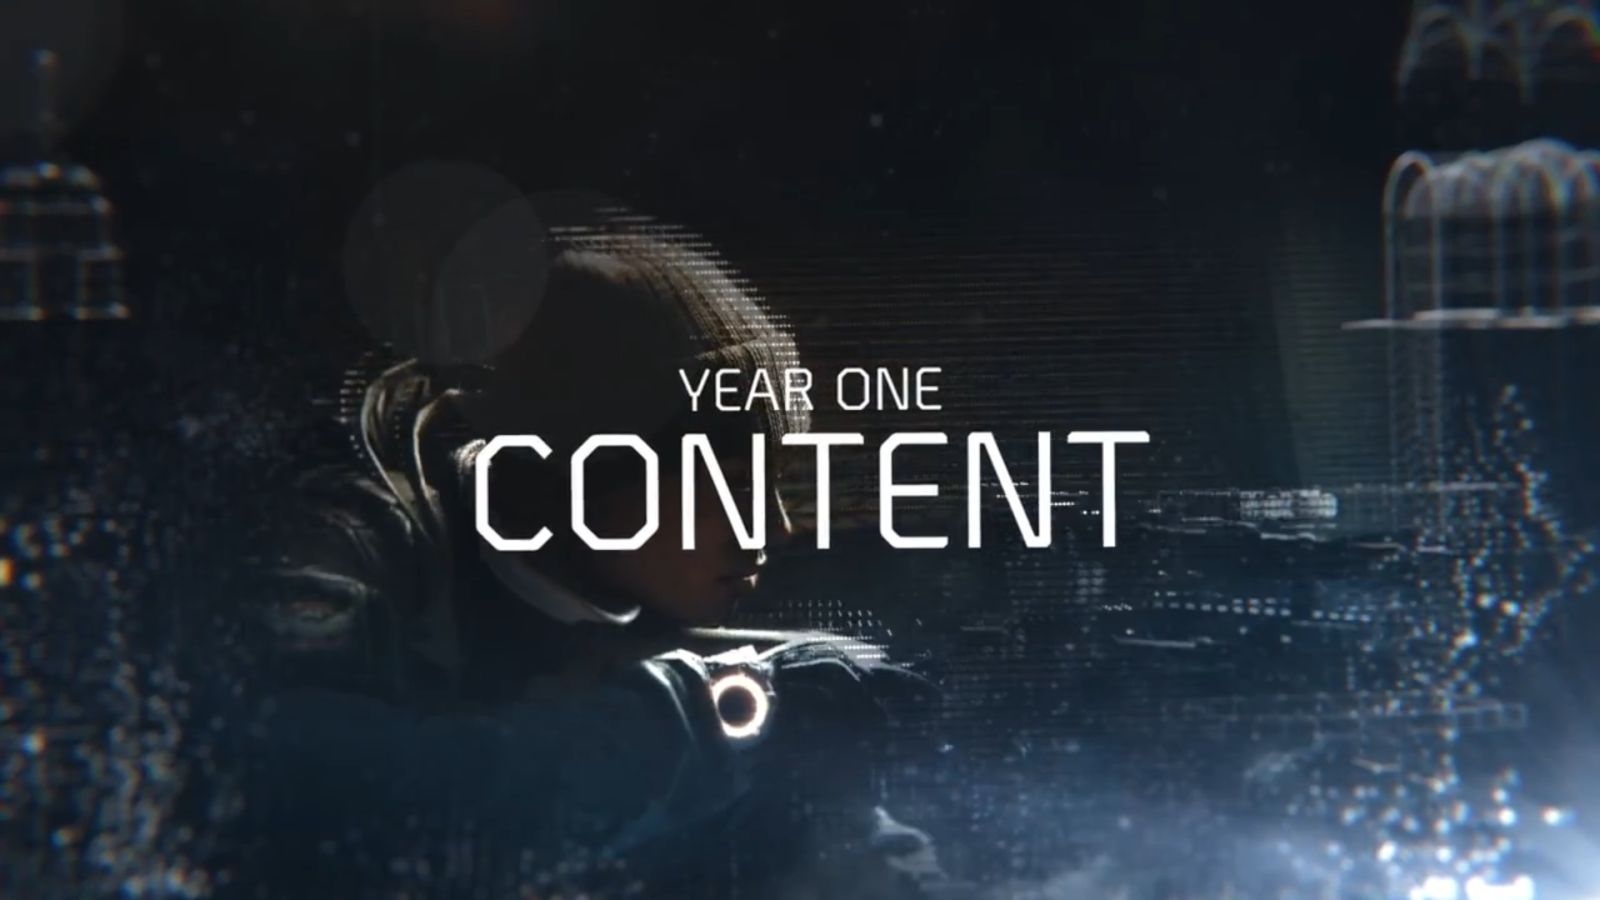 Year One content